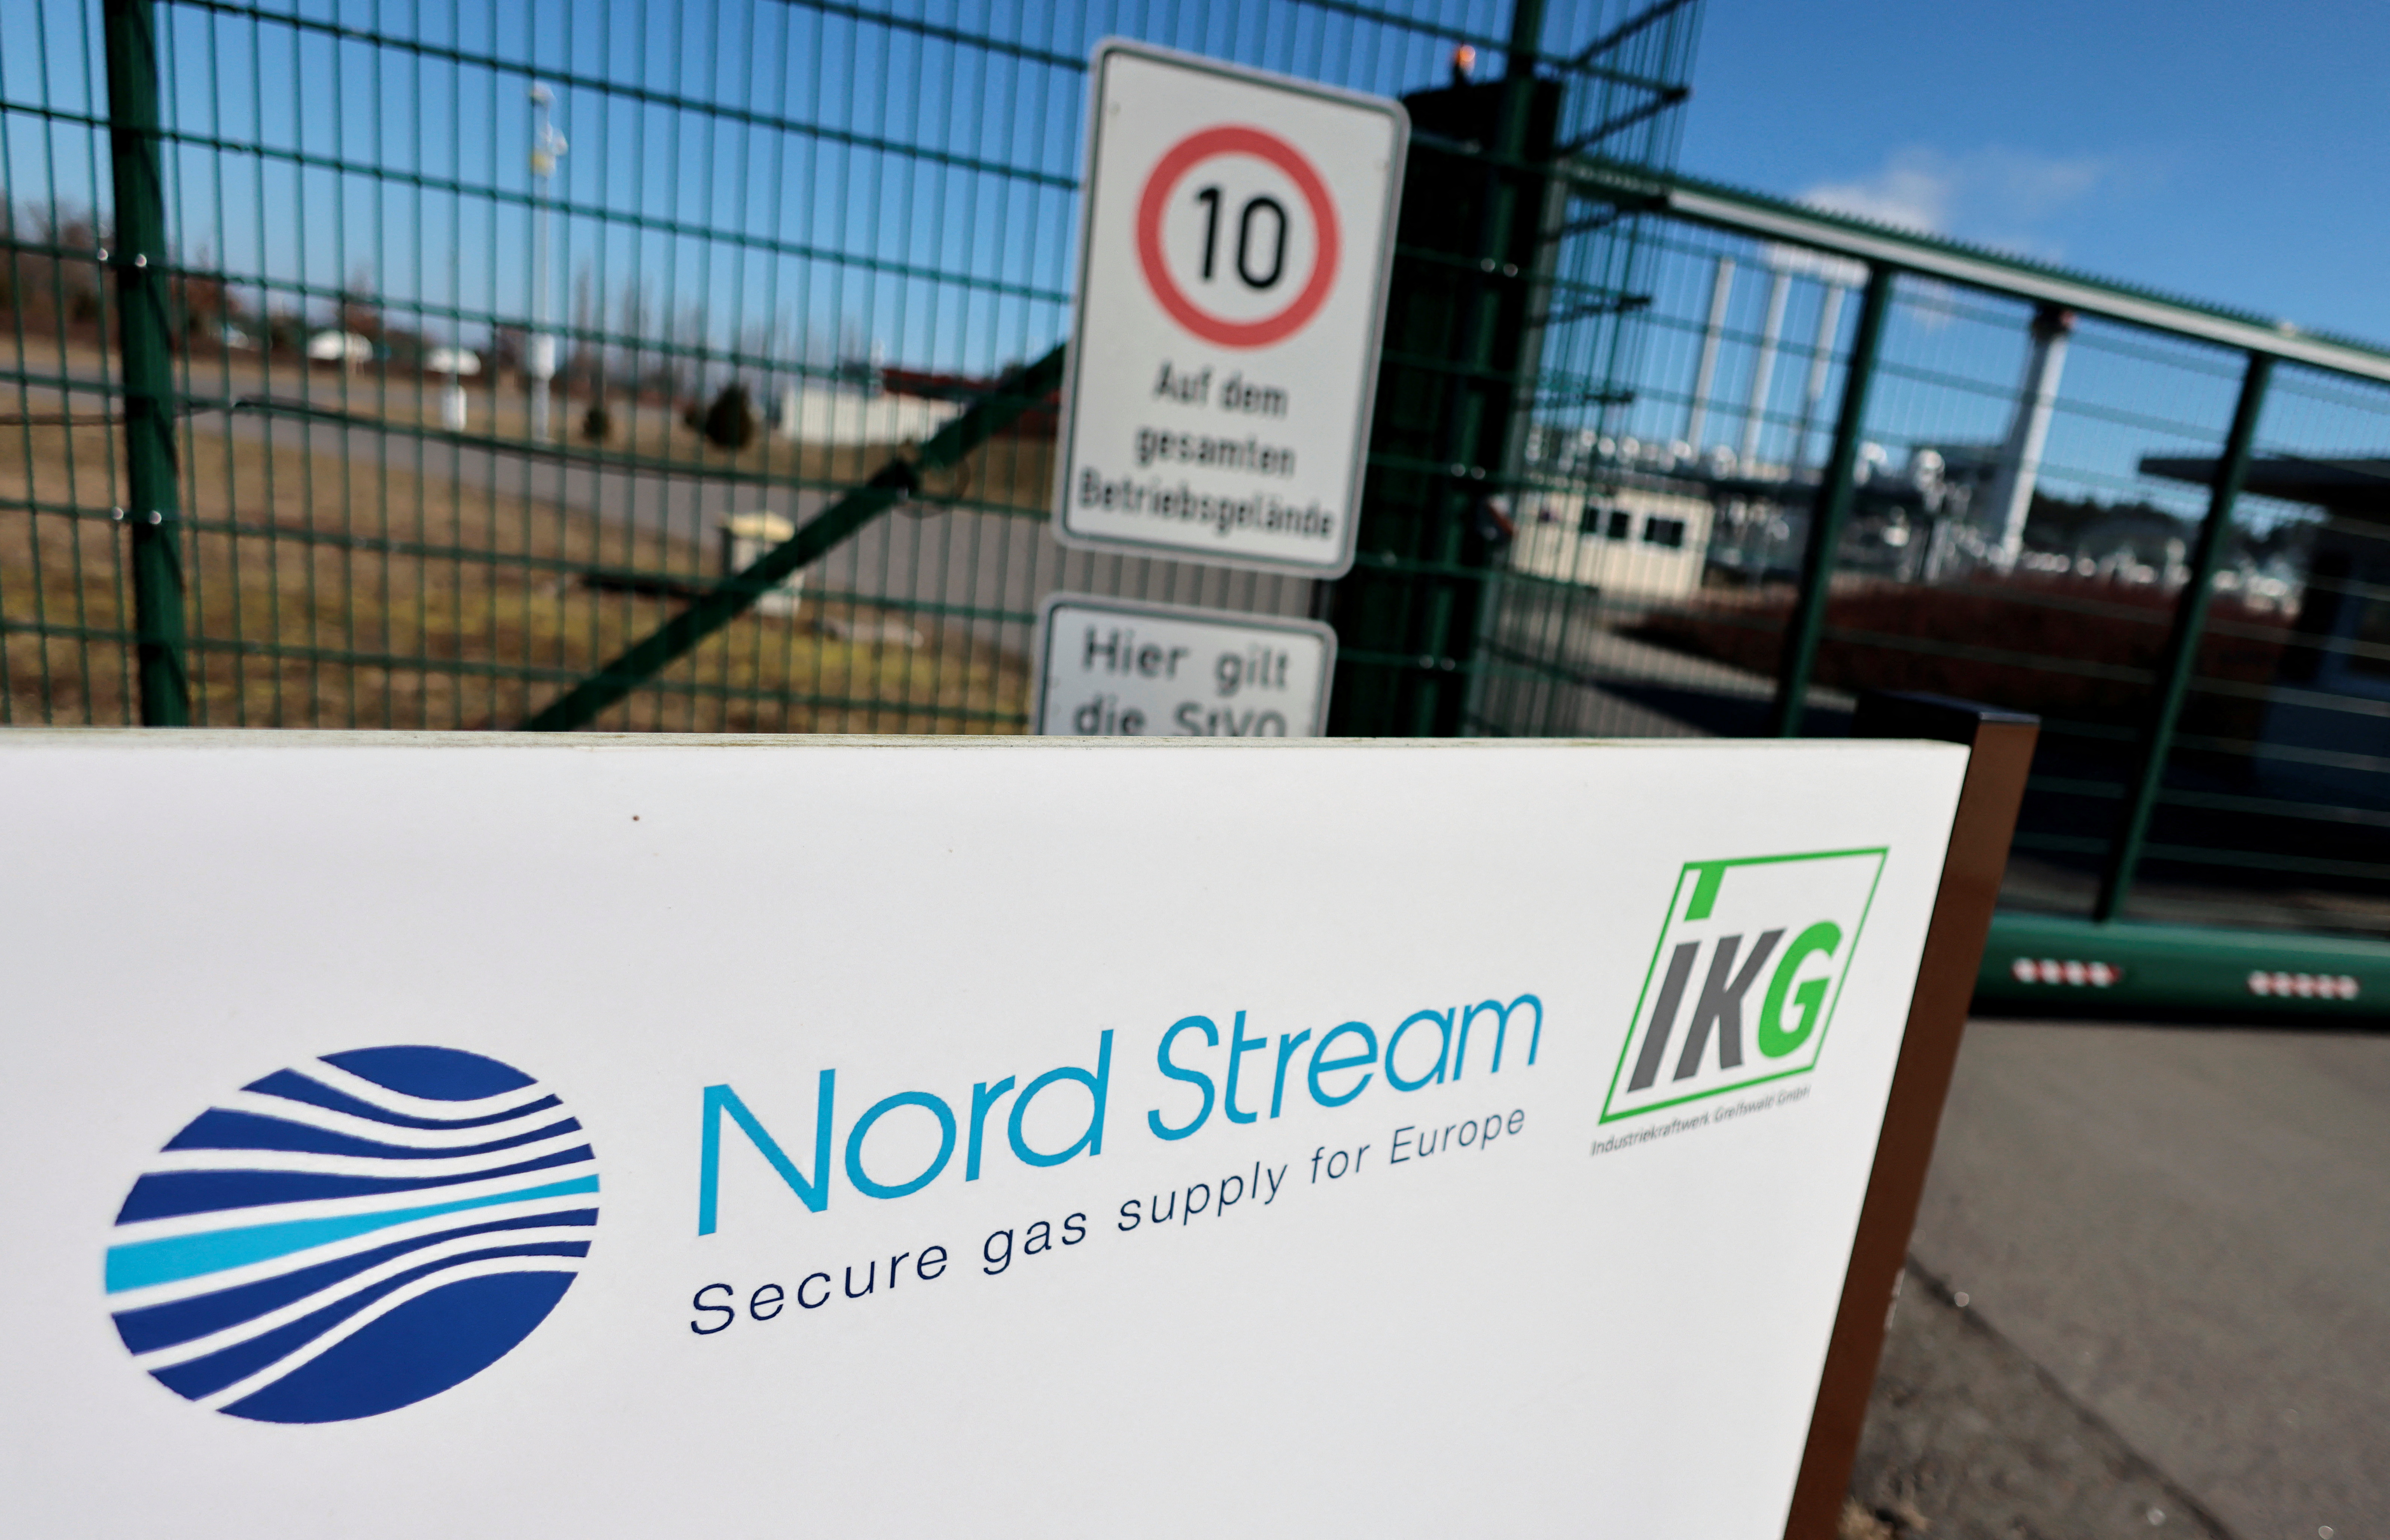 The logo of the landfall facilities of the 'Nord Stream 1' gas pipline in Lubmin